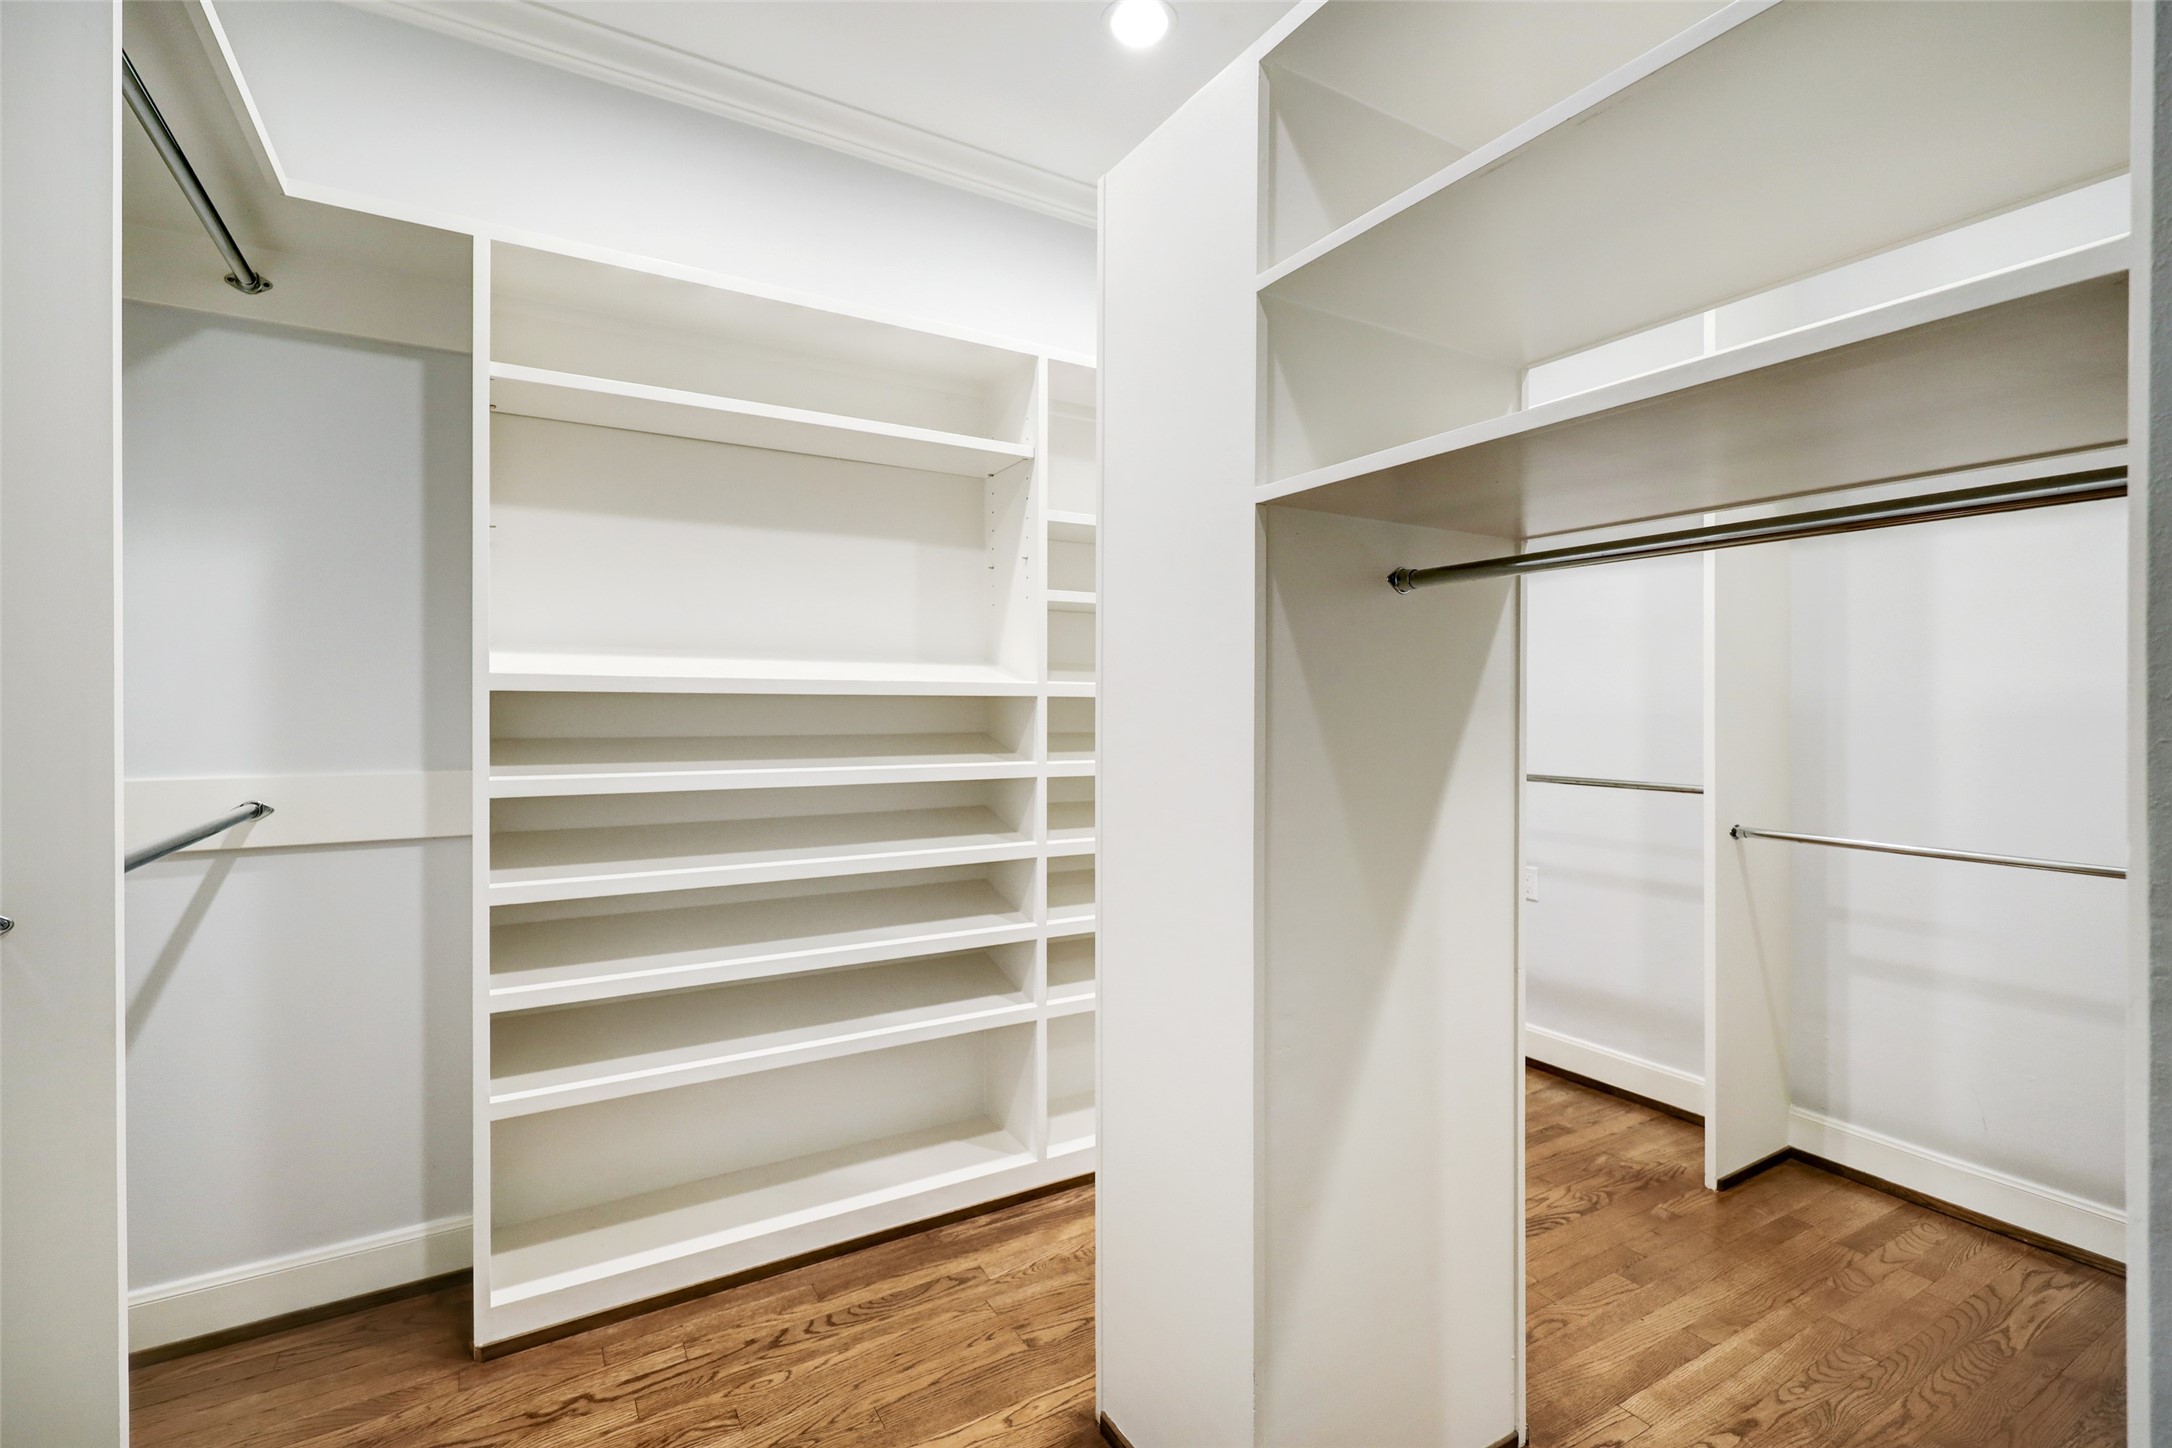 One of the two oversized primary bedroom walk-in closets is a haven of organization and style. It features plenty of racks and shelves, providing ample space to neatly arrange and showcase your wardrobe and accessories.